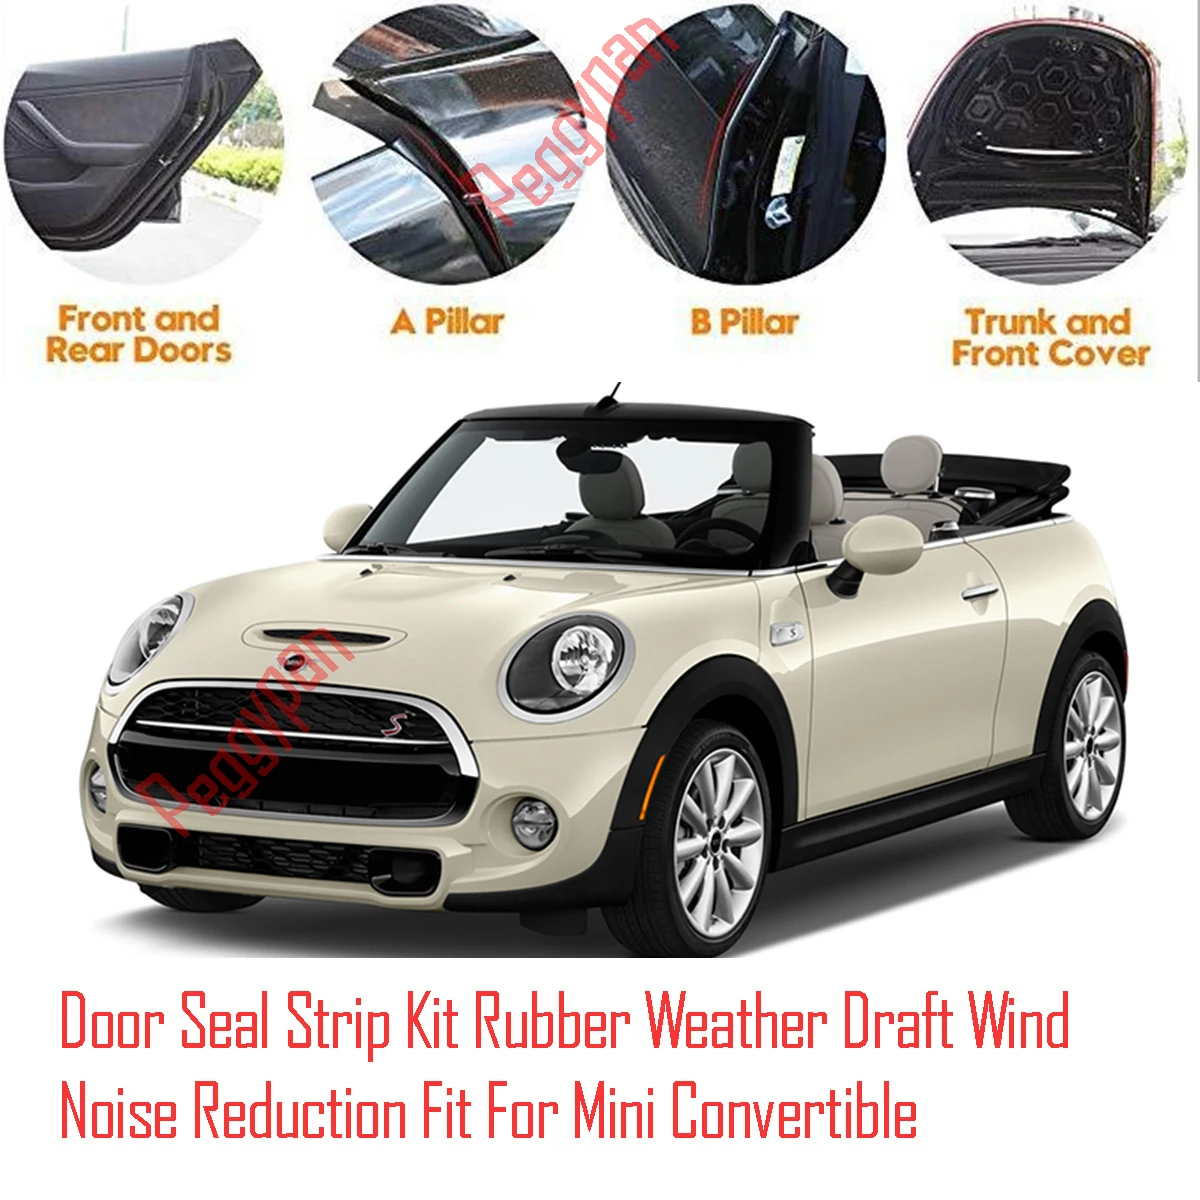 Door Seal Strip Kit Self Adhesive Window Engine Cover Soundproof Rubber Weather Draft Wind Noise Reduction For Mini Convertible